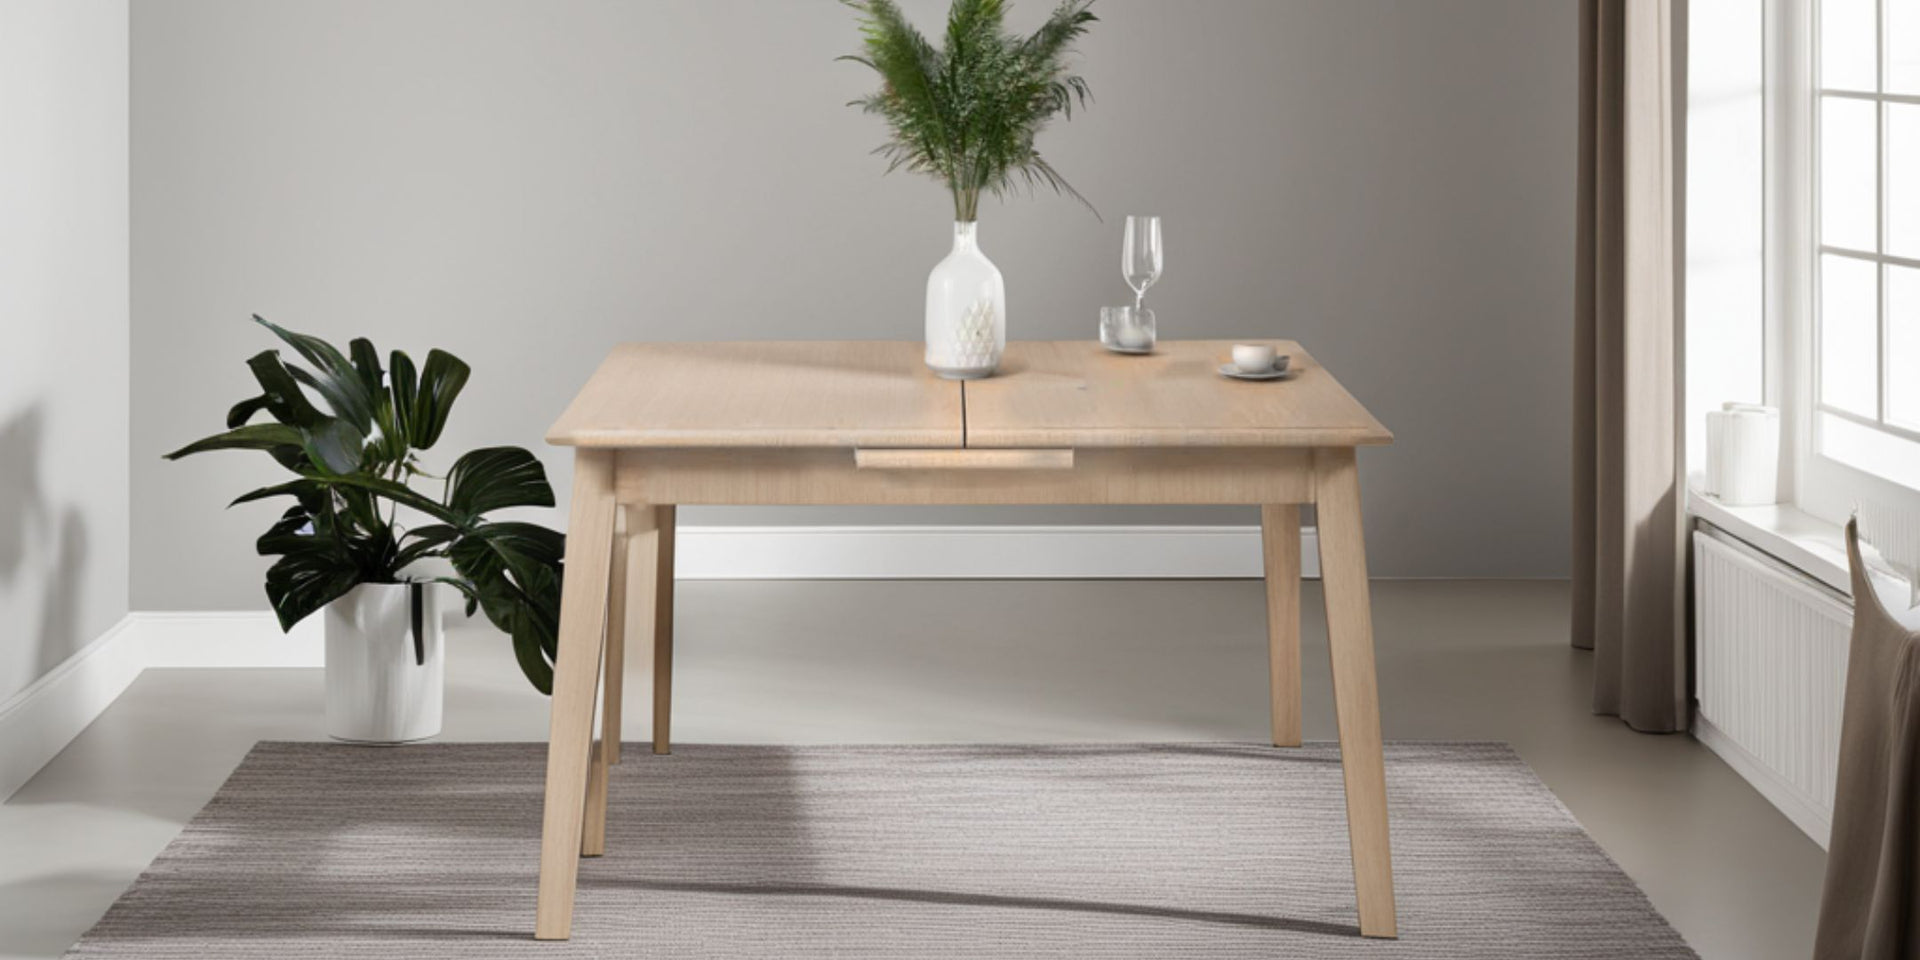 2 Seater Dining Table Singapore